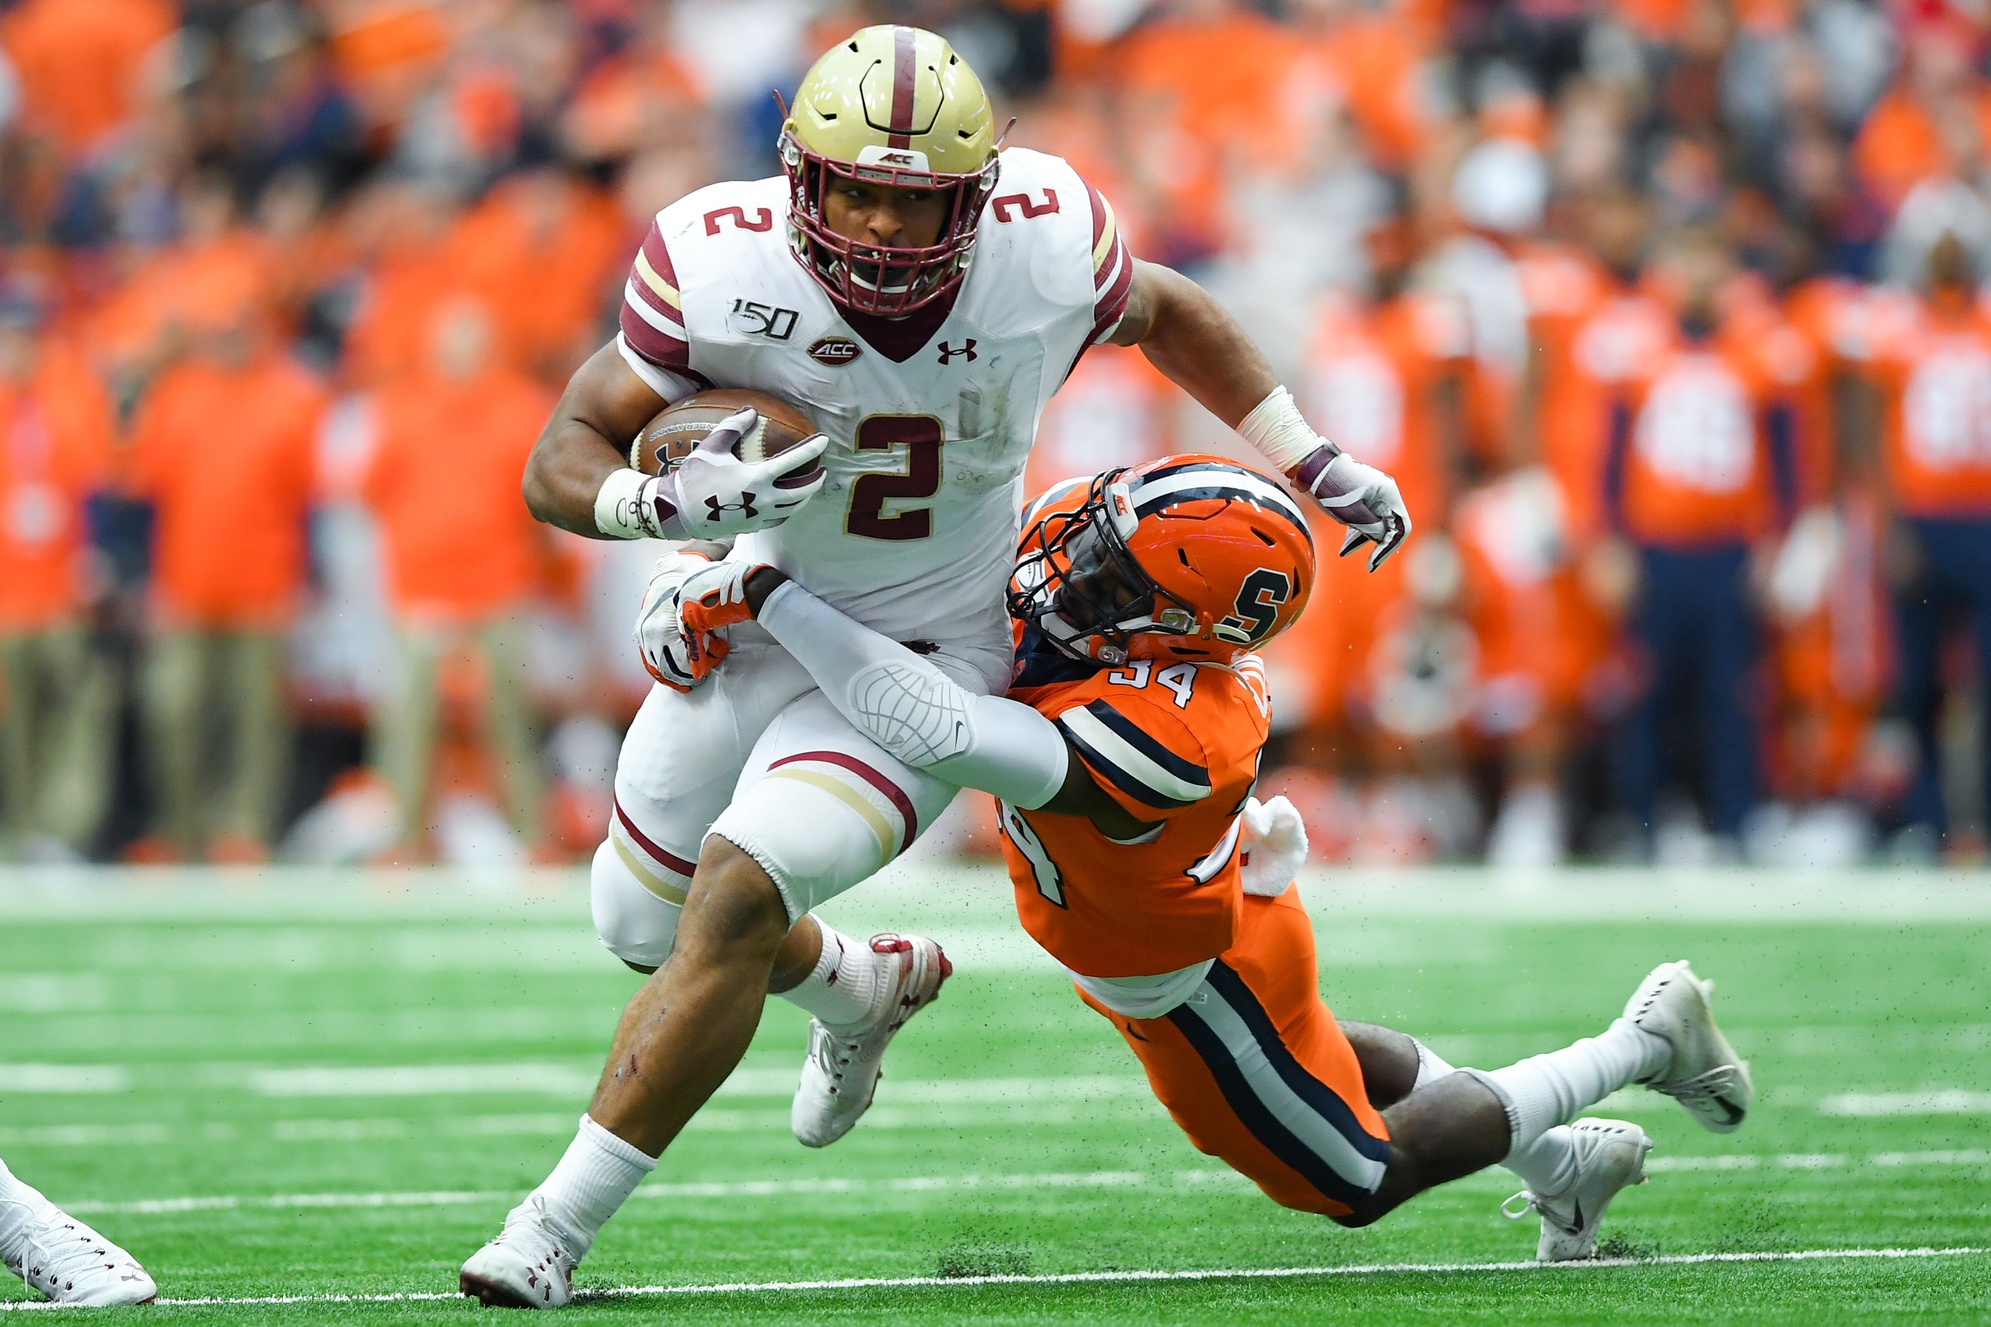 Boston College tailback AJ Dillon is one of many talented college